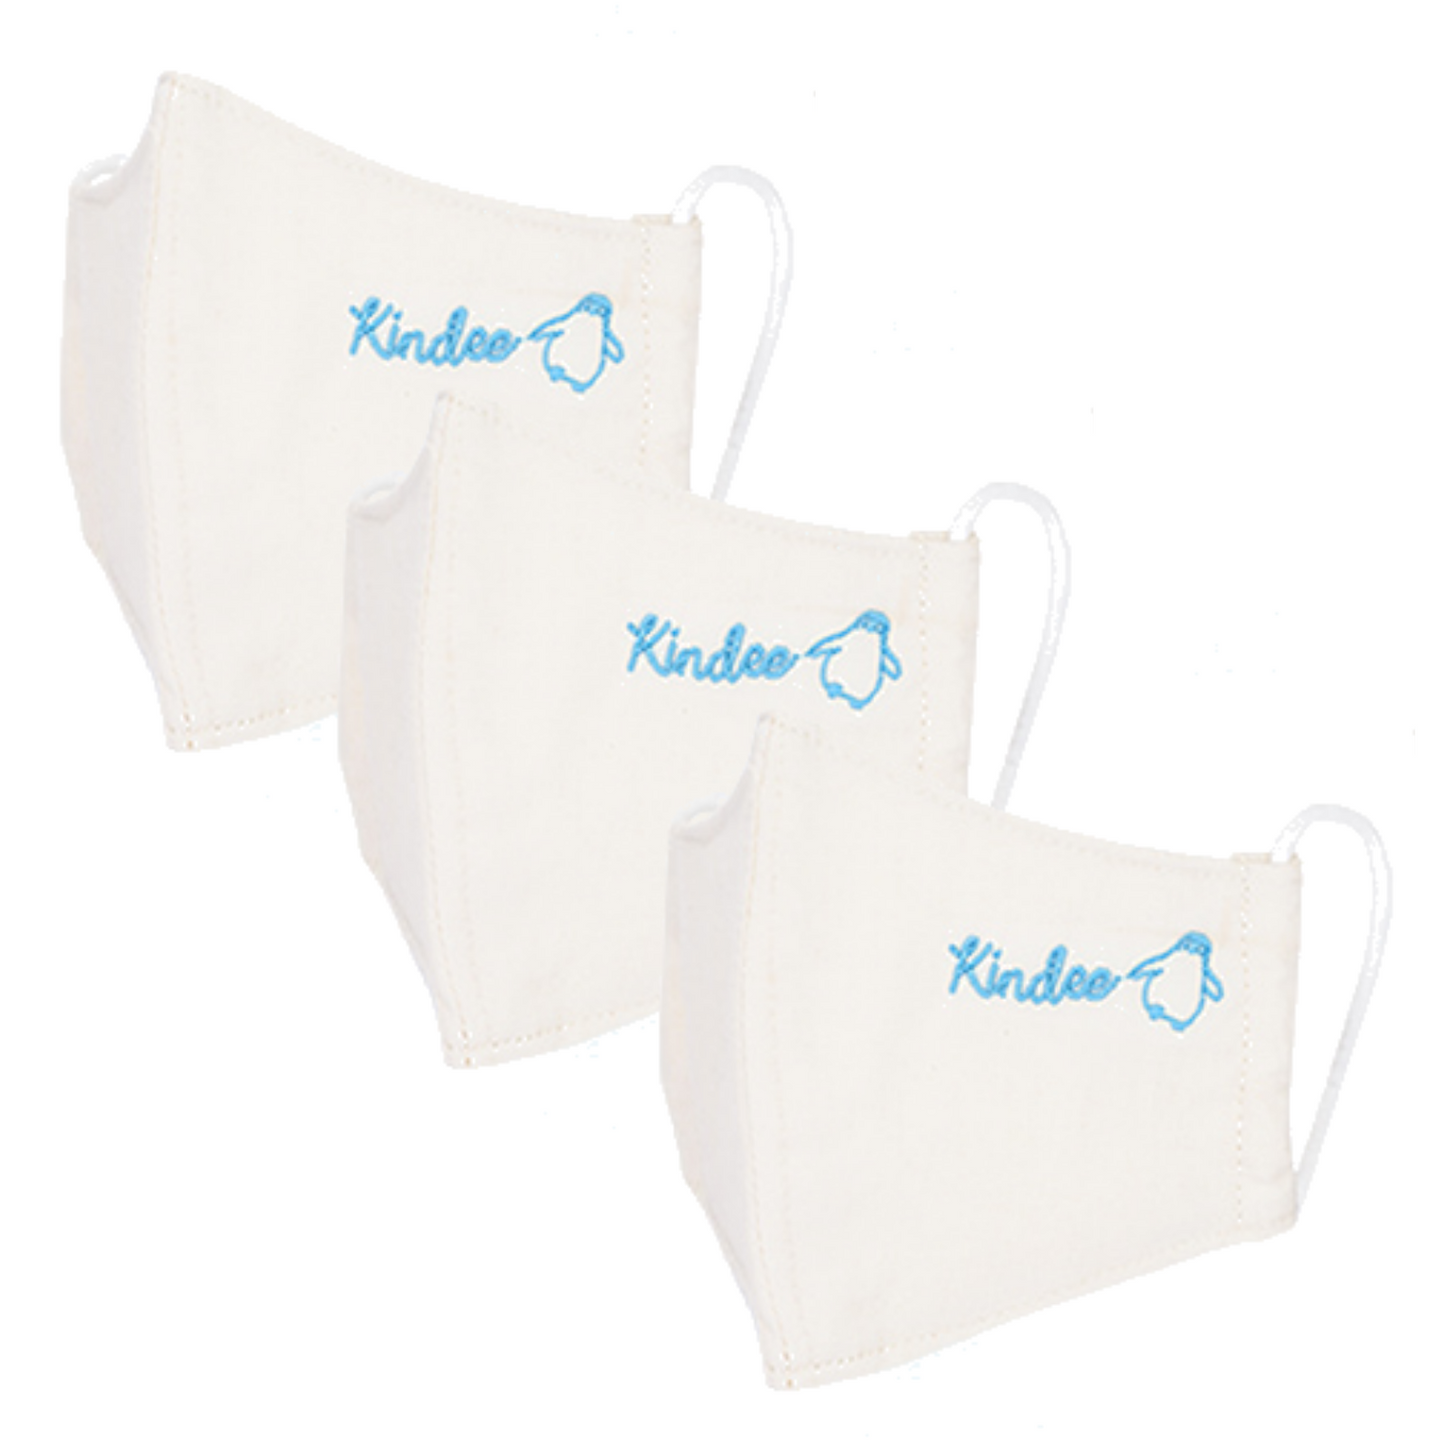 Kindee Organic Baby Mask S (2 to 5 years old) - Pack of 3 - WERONE